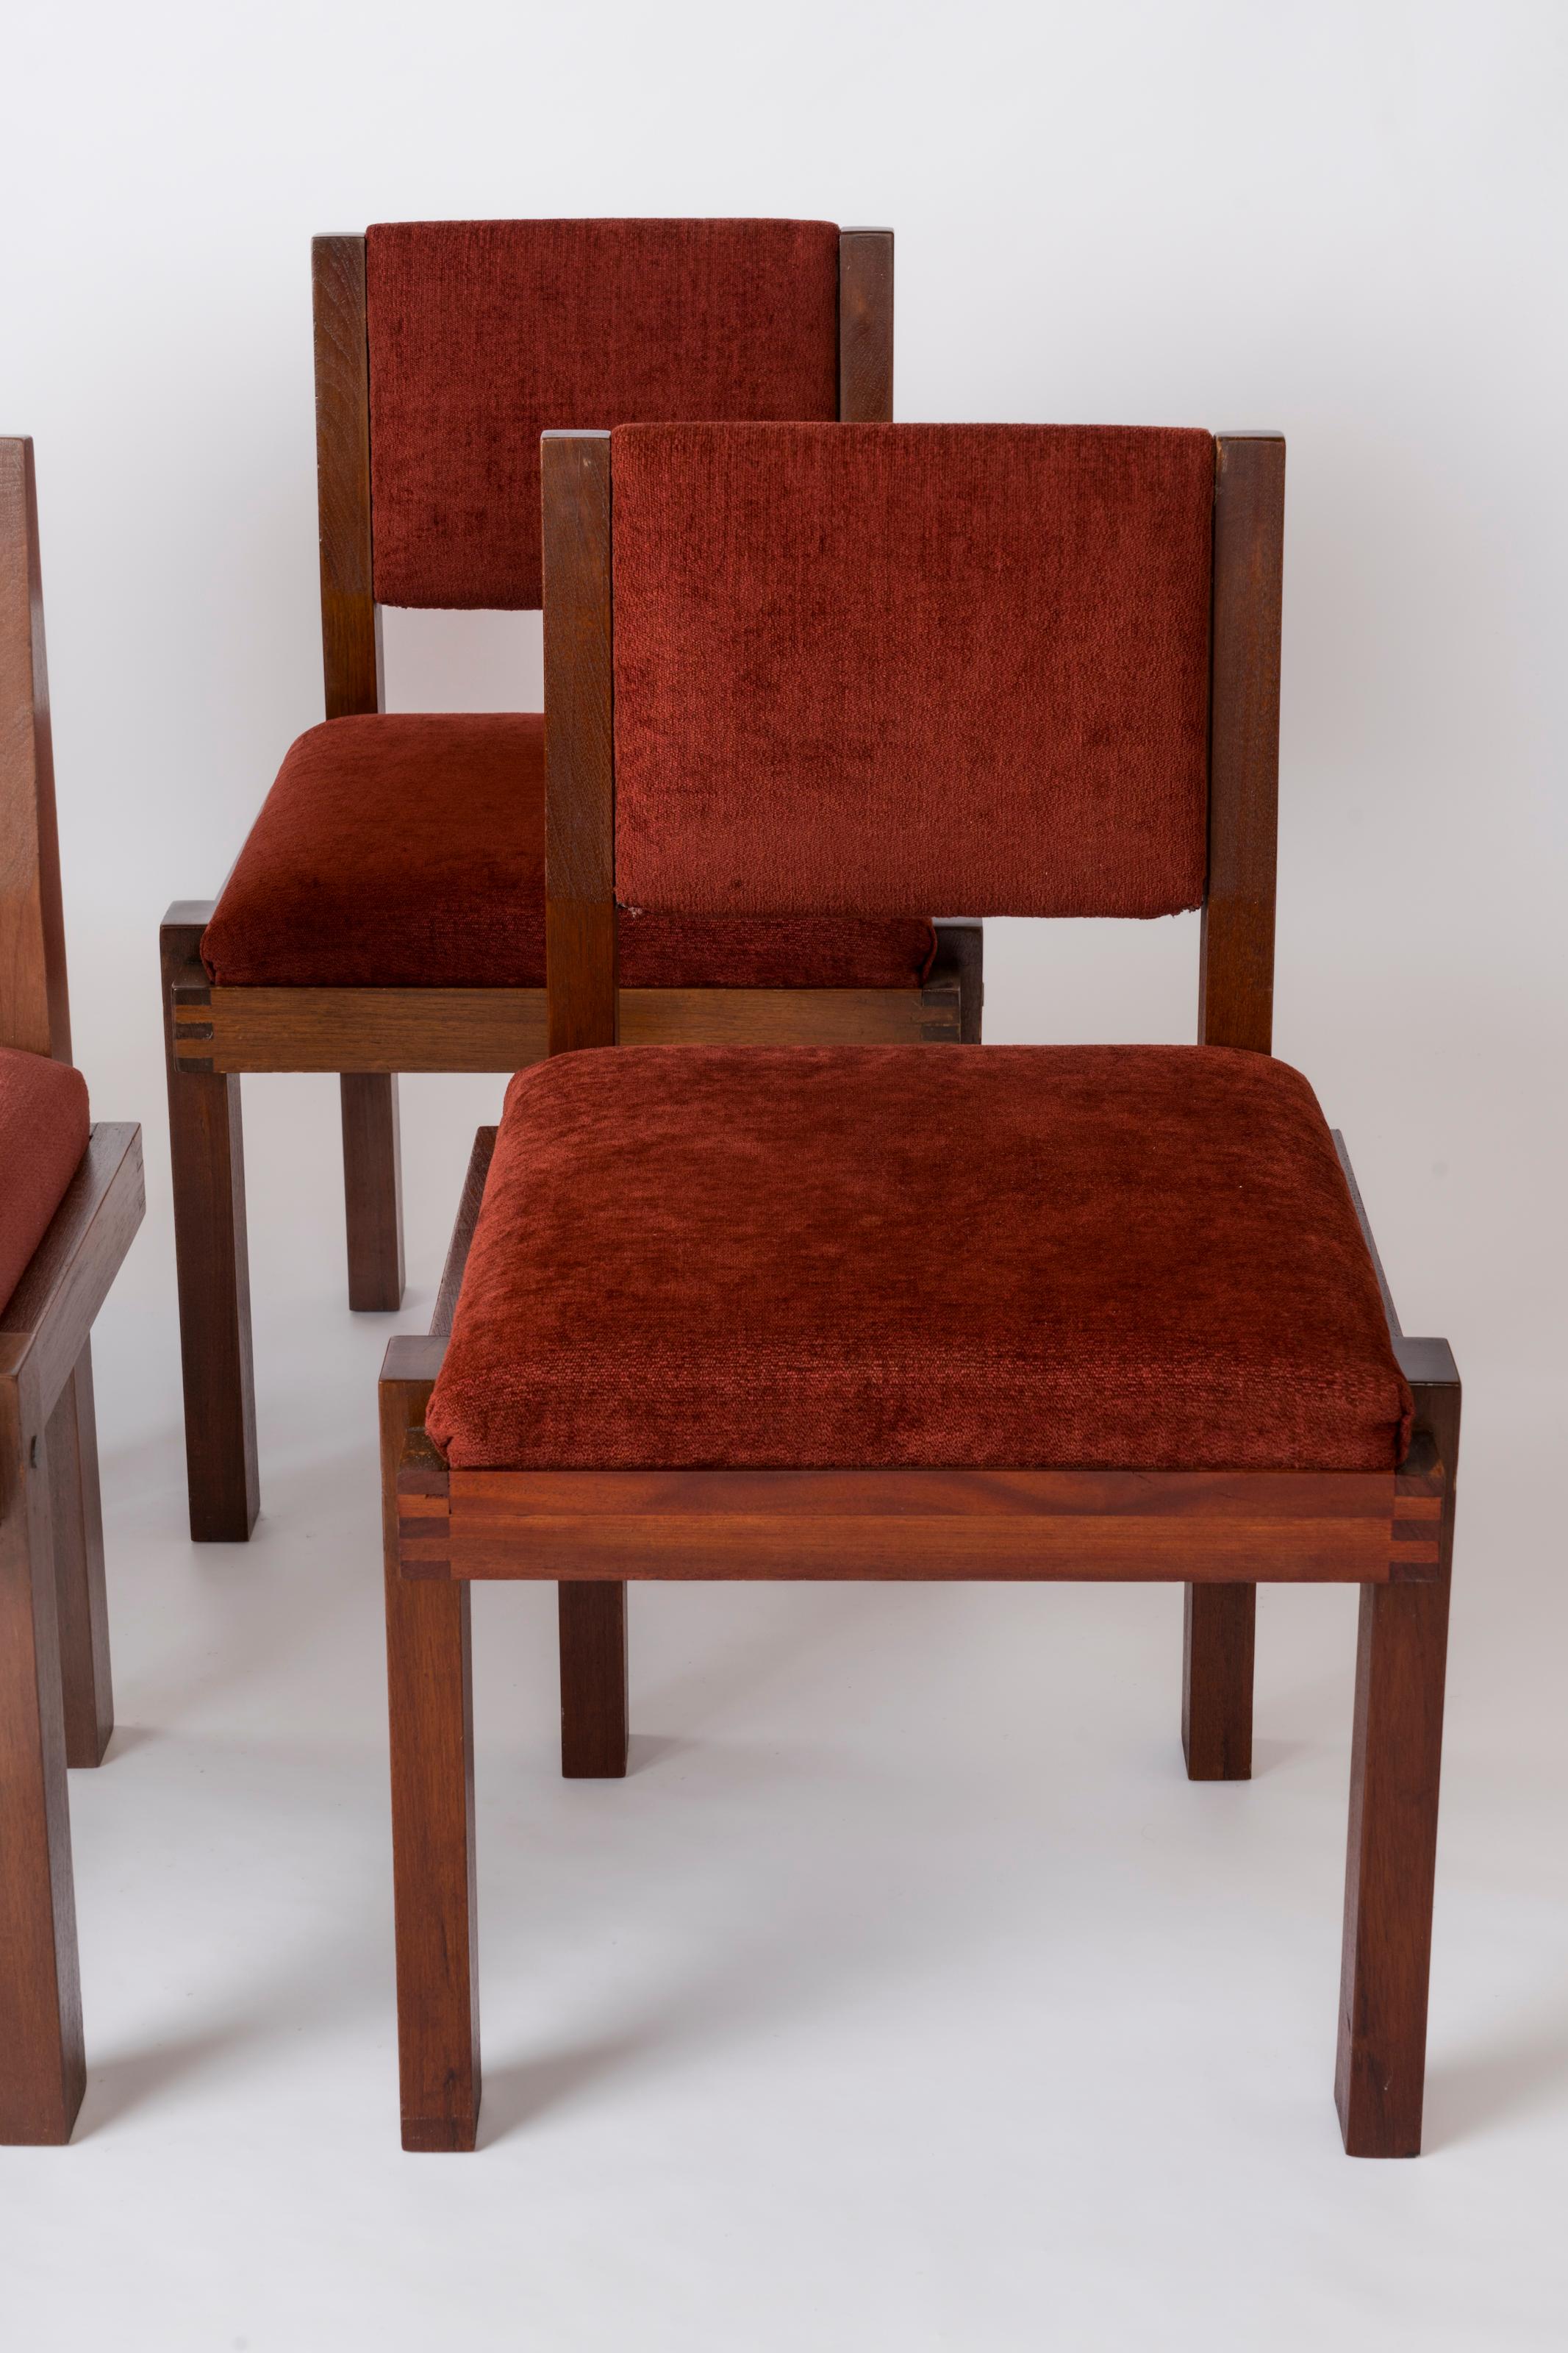 Six Modernist Solid Mahogany and Bordeaux Upholstery Chairs - France 1970's For Sale 2